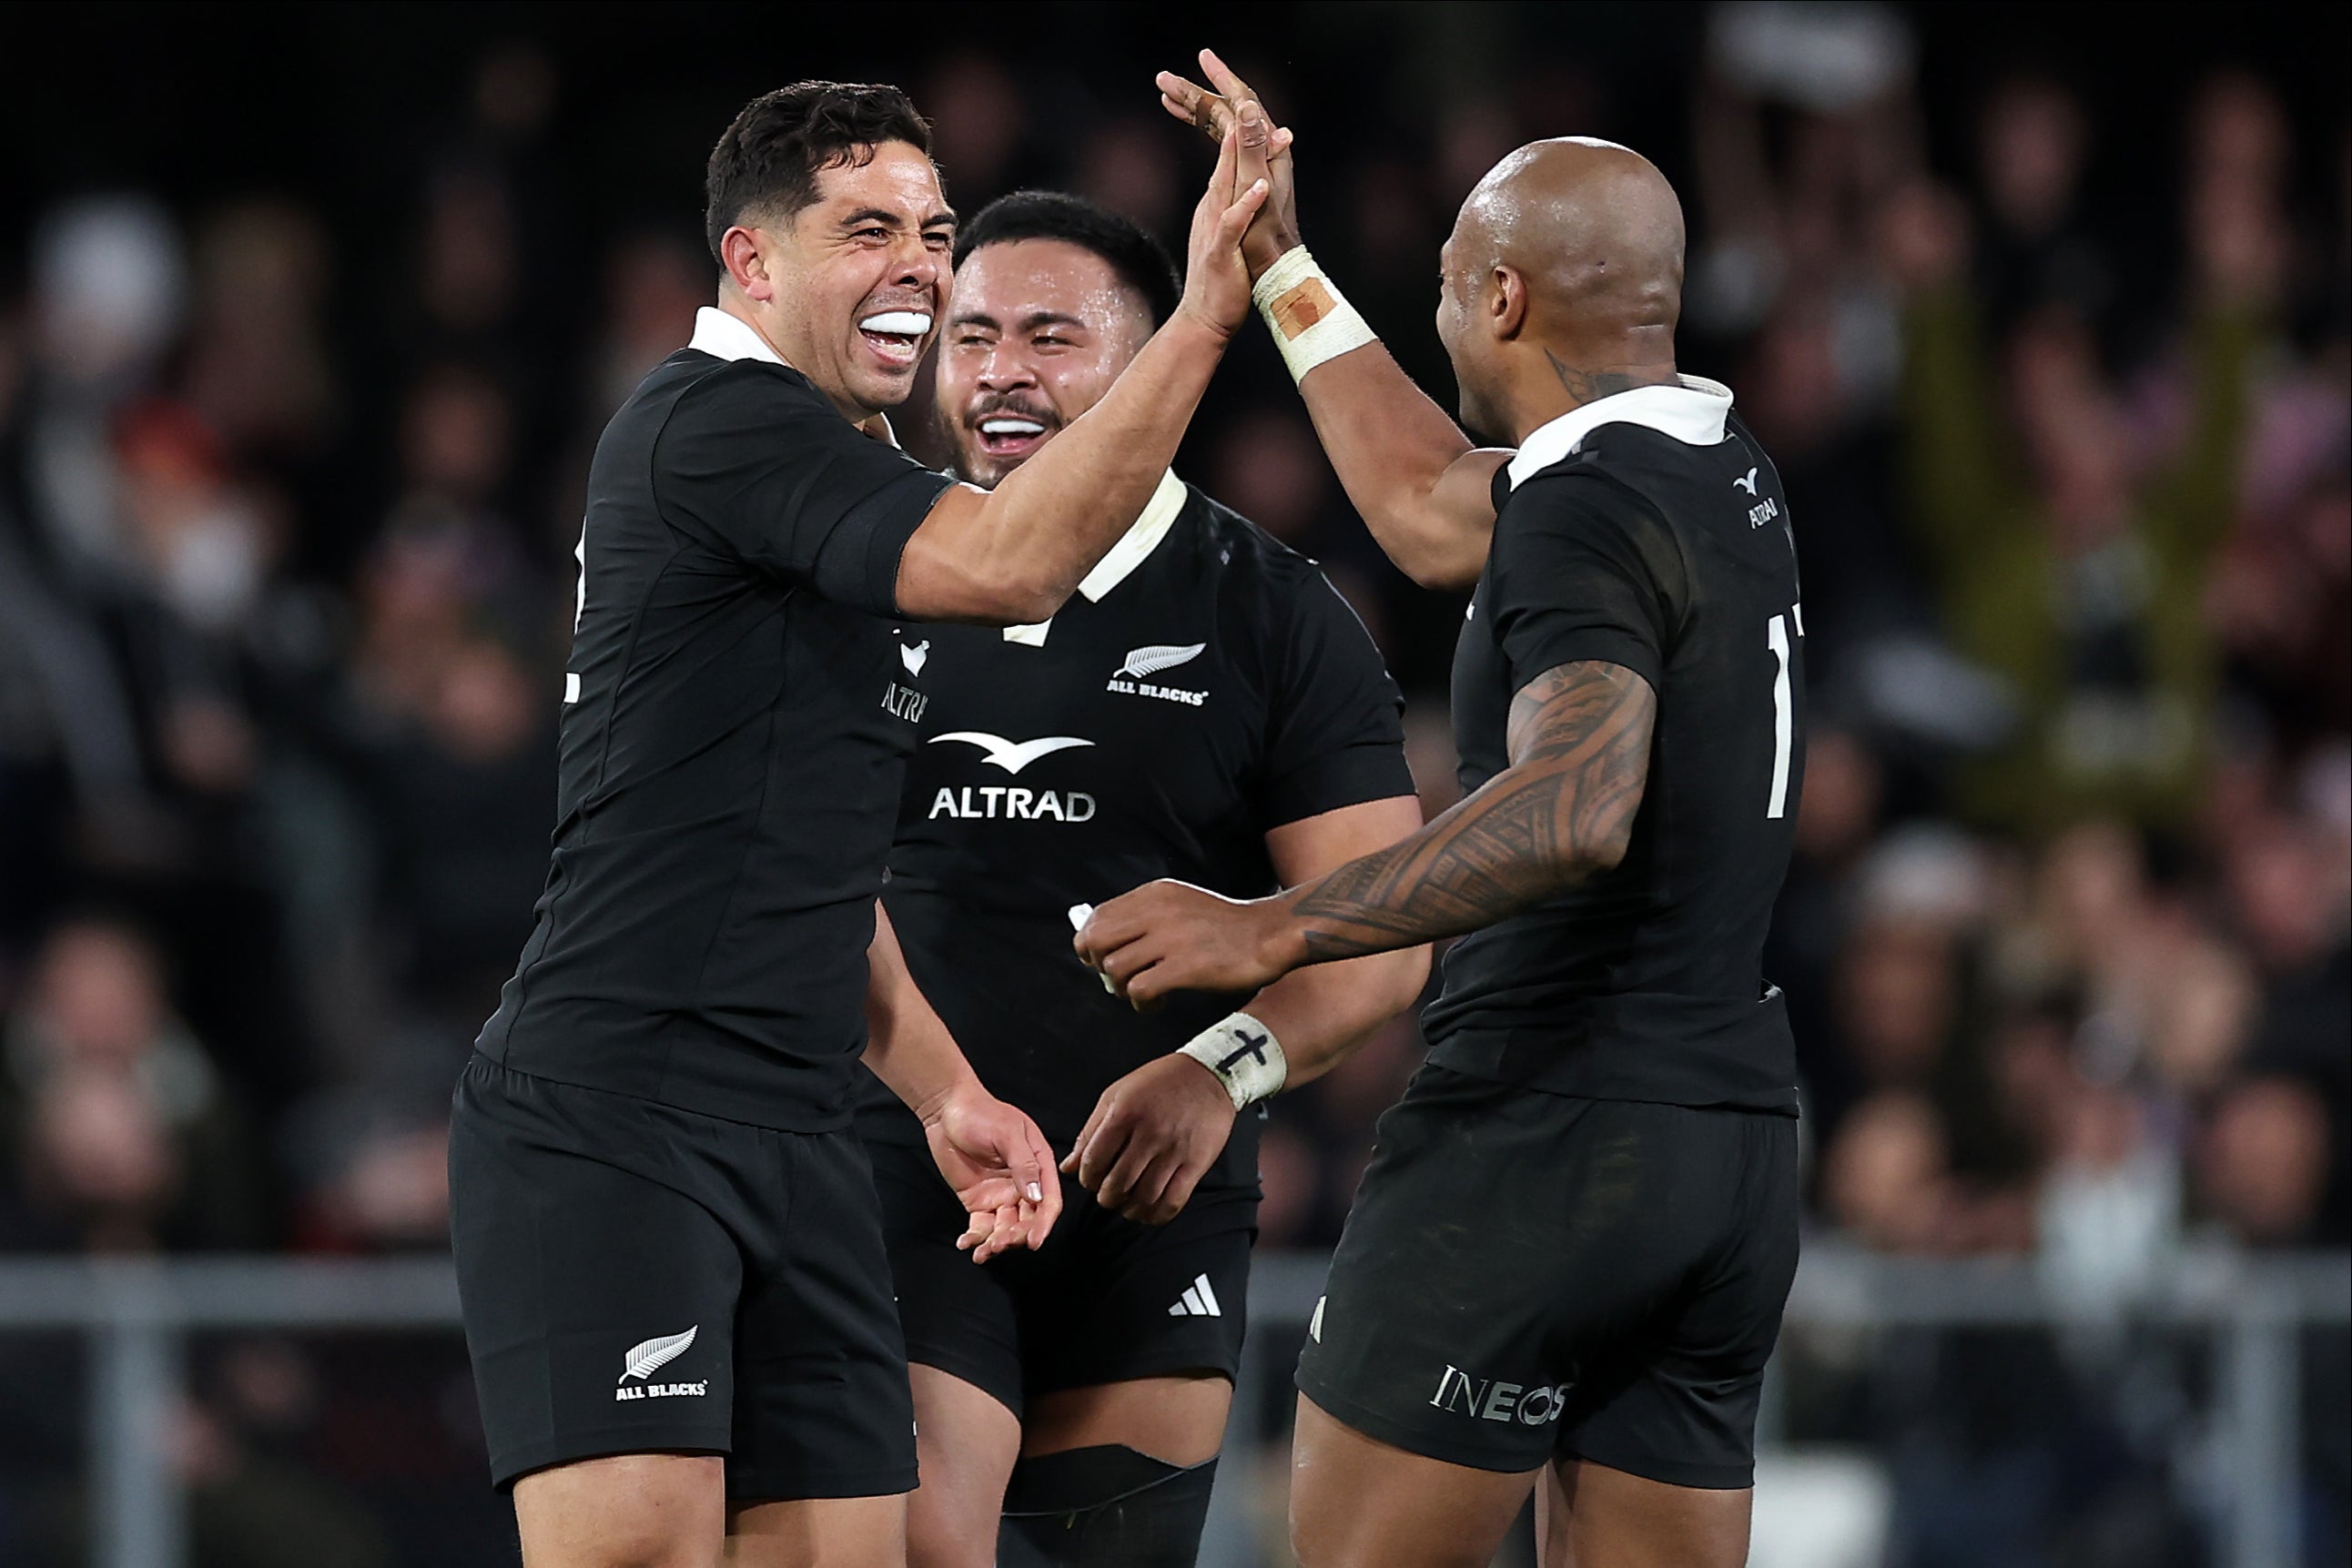 The All Blacks snatched victory in Dunedin, though England came agonisingly close